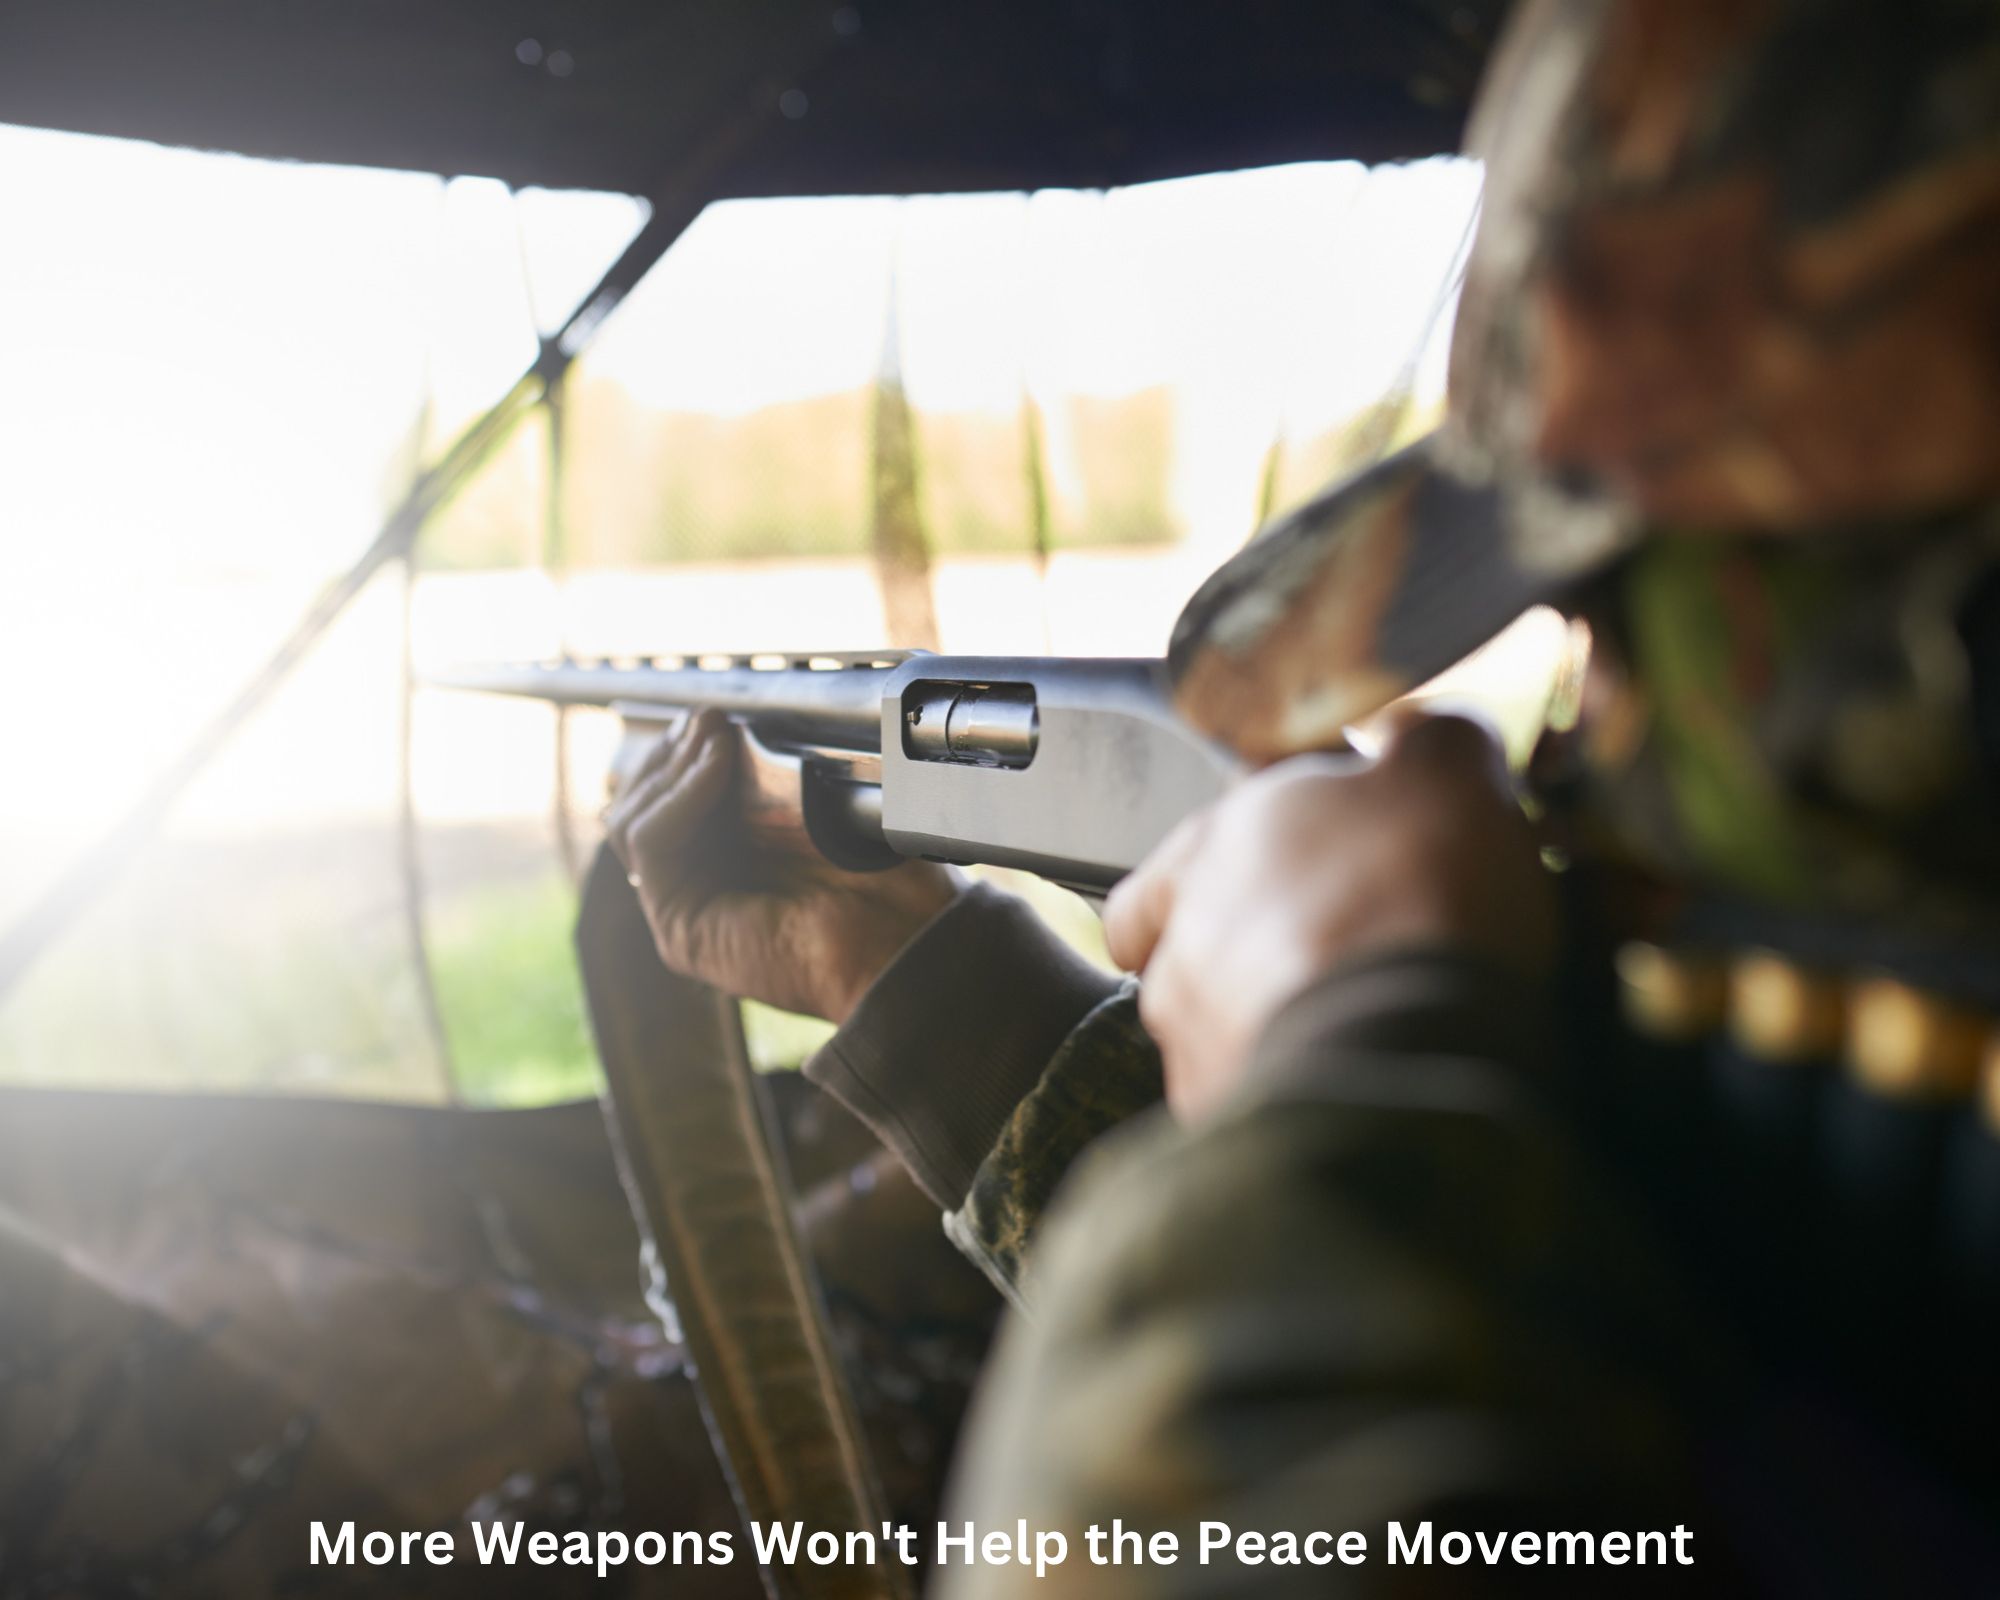 More Weapons Won't Help the Peace Movement